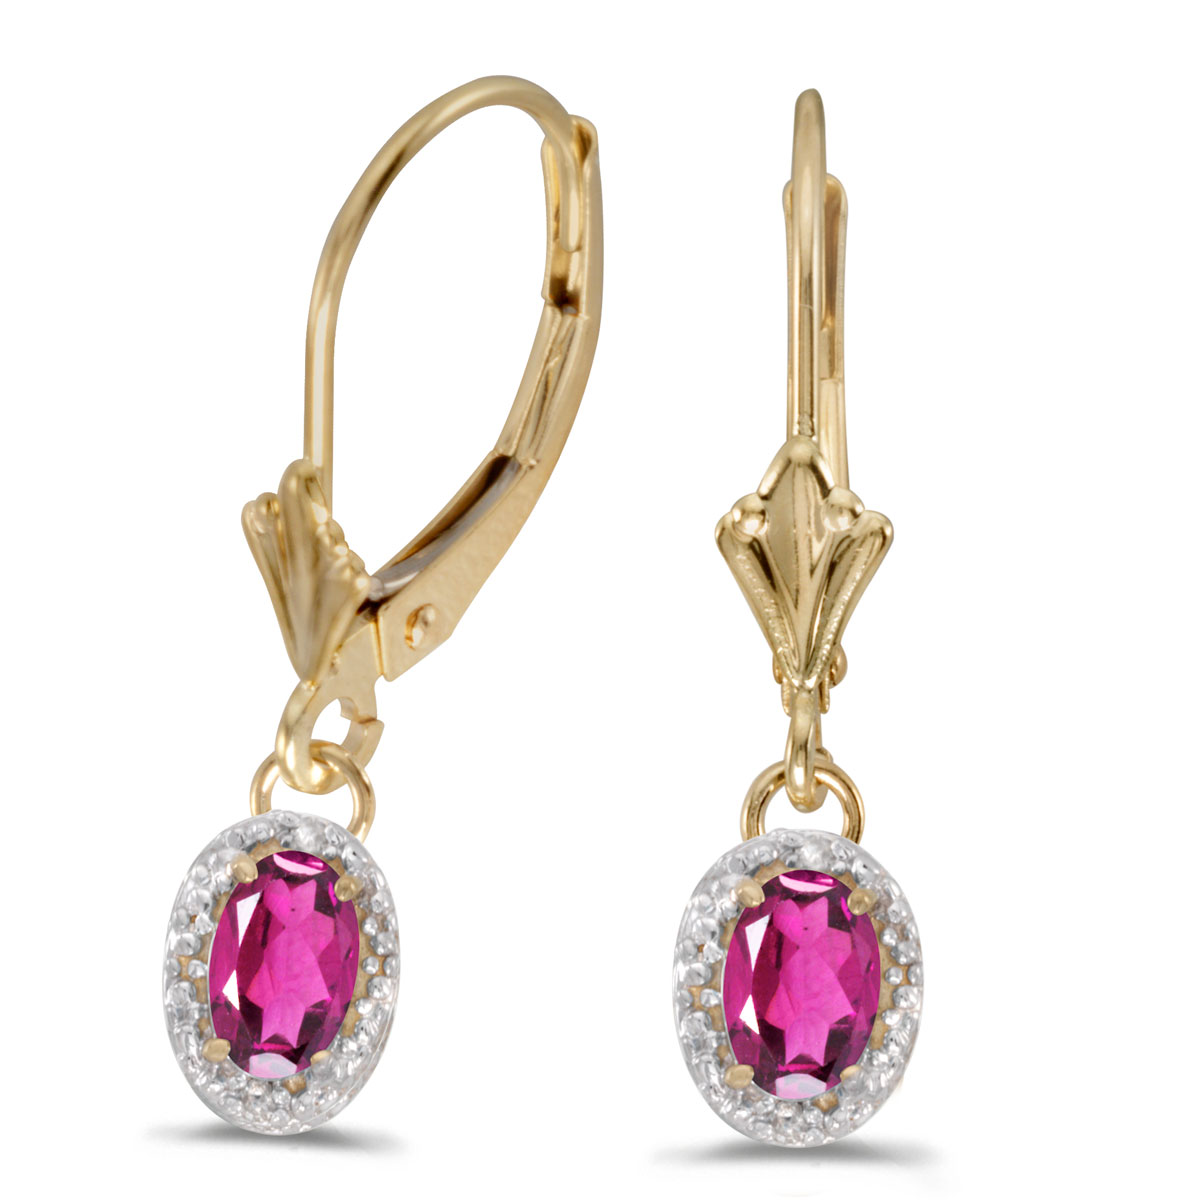 JCX2120: Beautiful 10k yellow gold leverback earrings with pretty 6x4 mm pink topaz stones complemented with bright diamonds.